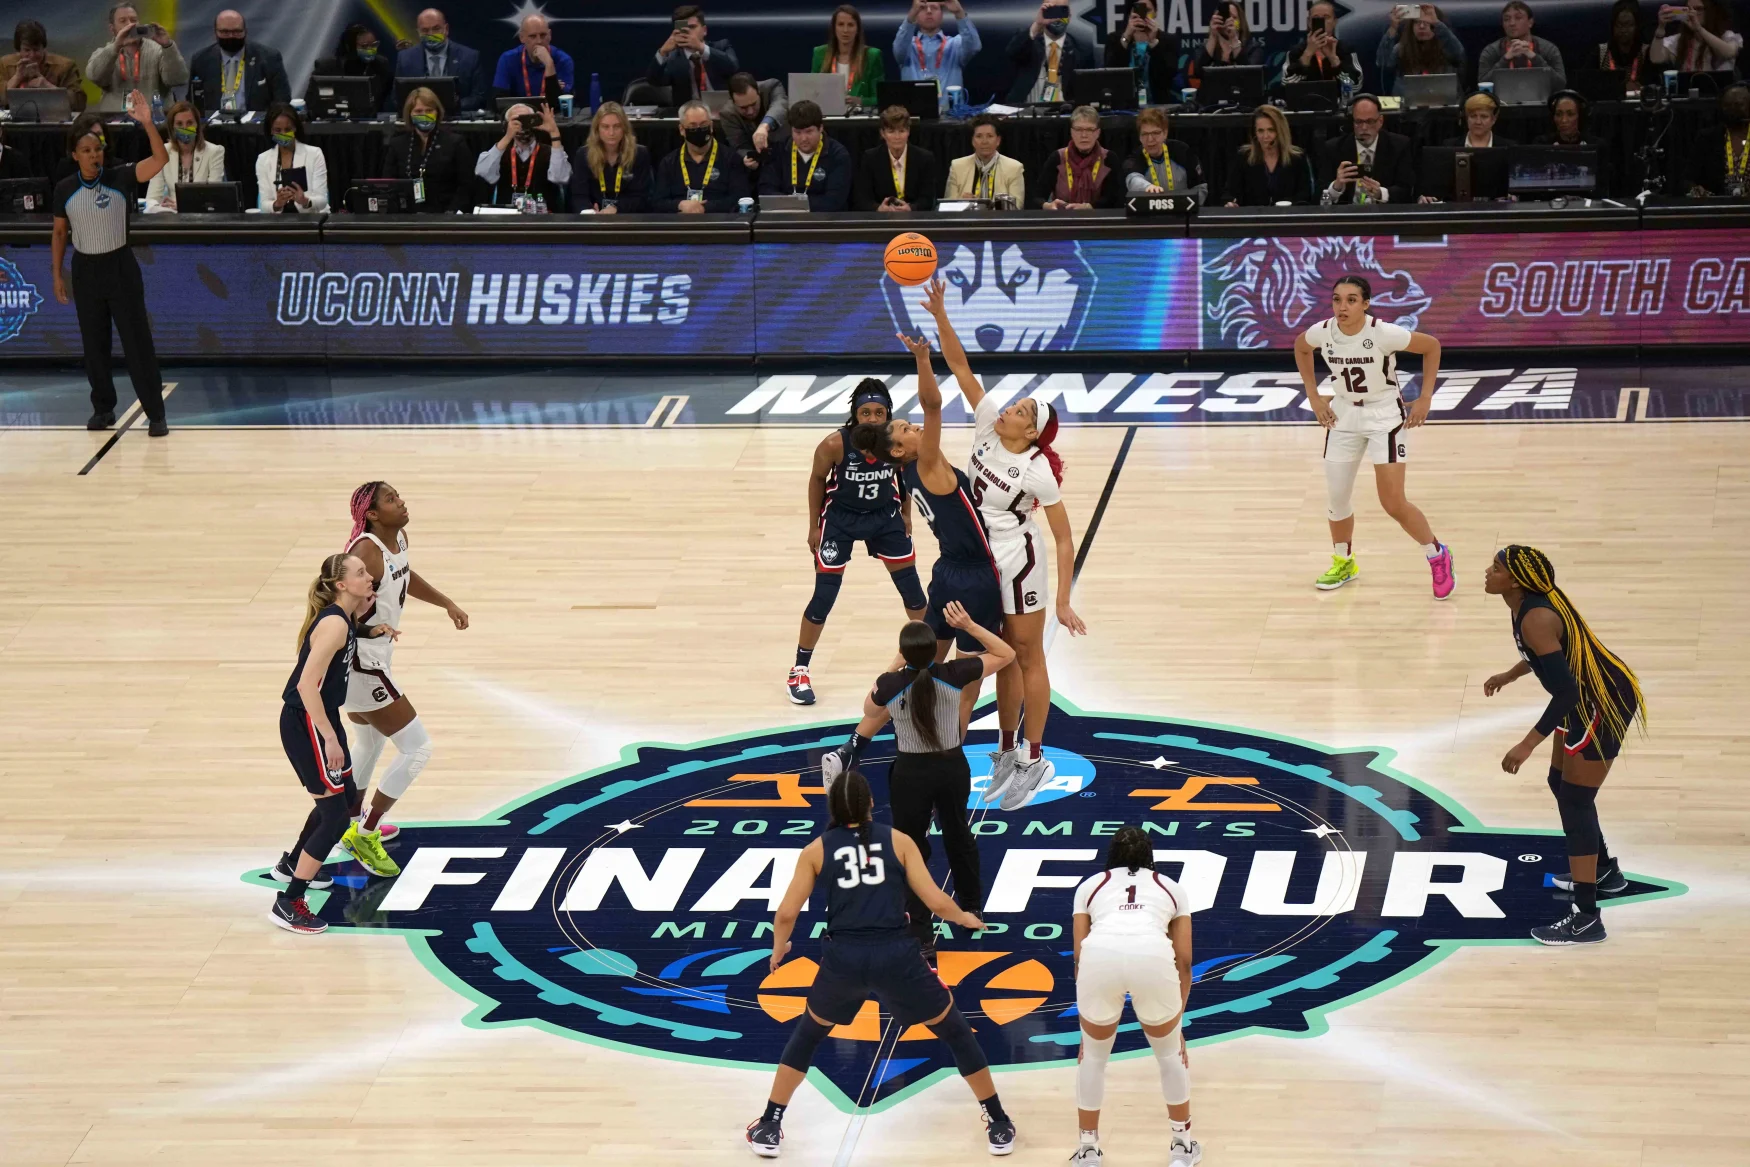 Apr 3, 2022; Minneapolis, MN, USA; A general overall view of the opening tipoff between UConn Huskies forward Olivia Nelson-Ododa (20) and South Carolina Gamecocks forward Victaria Saxton (5) in the Final Four championship game of the women's college basketball NCAA Tournament at Target Center. South Carolina defeated UConn 64-49. Mandatory Credit: Kirby Lee-USA TODAY Sports